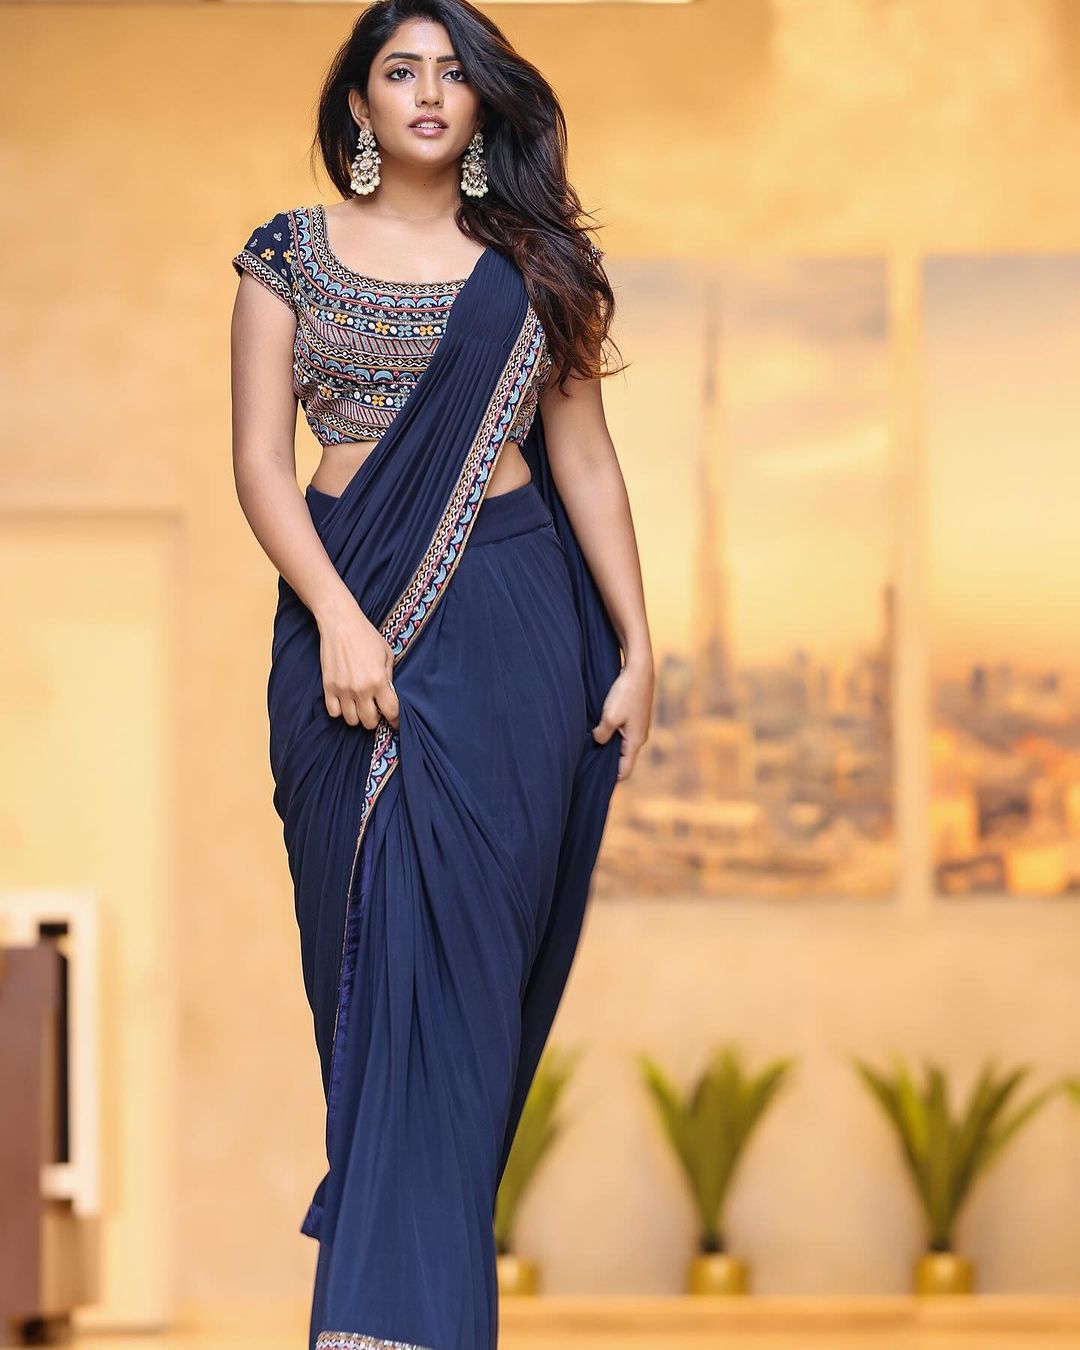 Actress eesha rebba is looking beautiful in this clicks-Actresseesha, Eesha Rebba Photos,Spicy Hot Pics,Images,High Resolution WallPapers Download